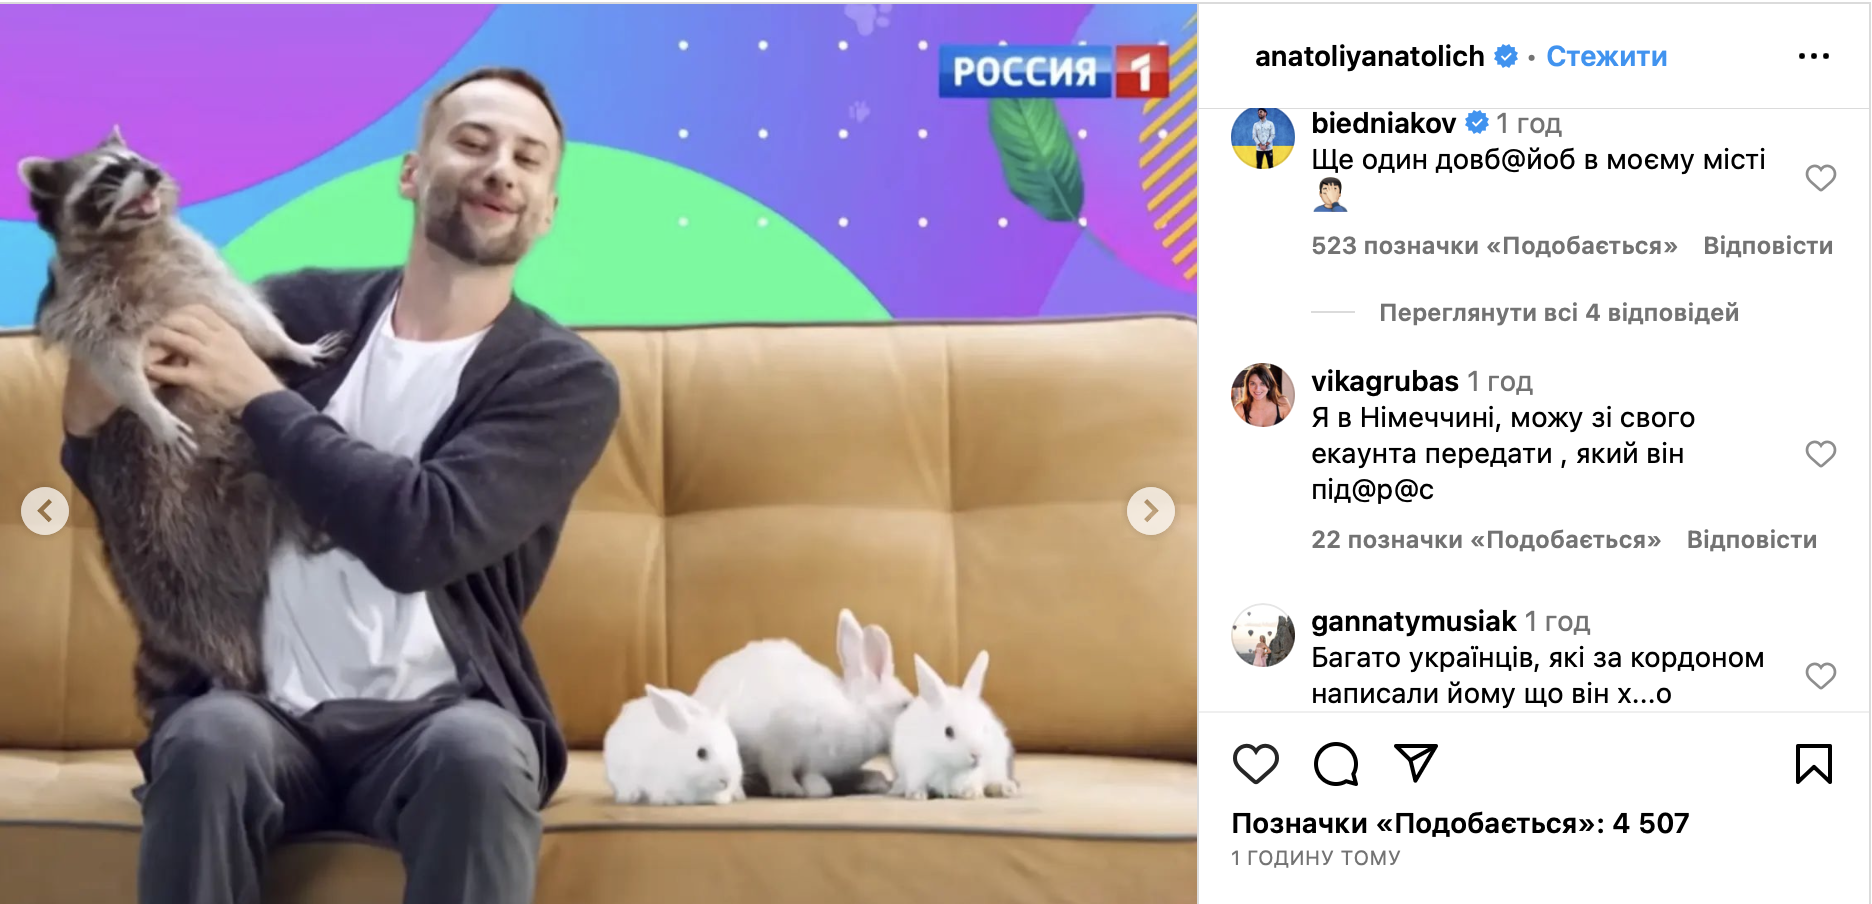 ''Even a raccoon is disgusted'': Anatolich, Bednyakov and other stars swear at traitor Shepelev for coming to occupied Mariupol